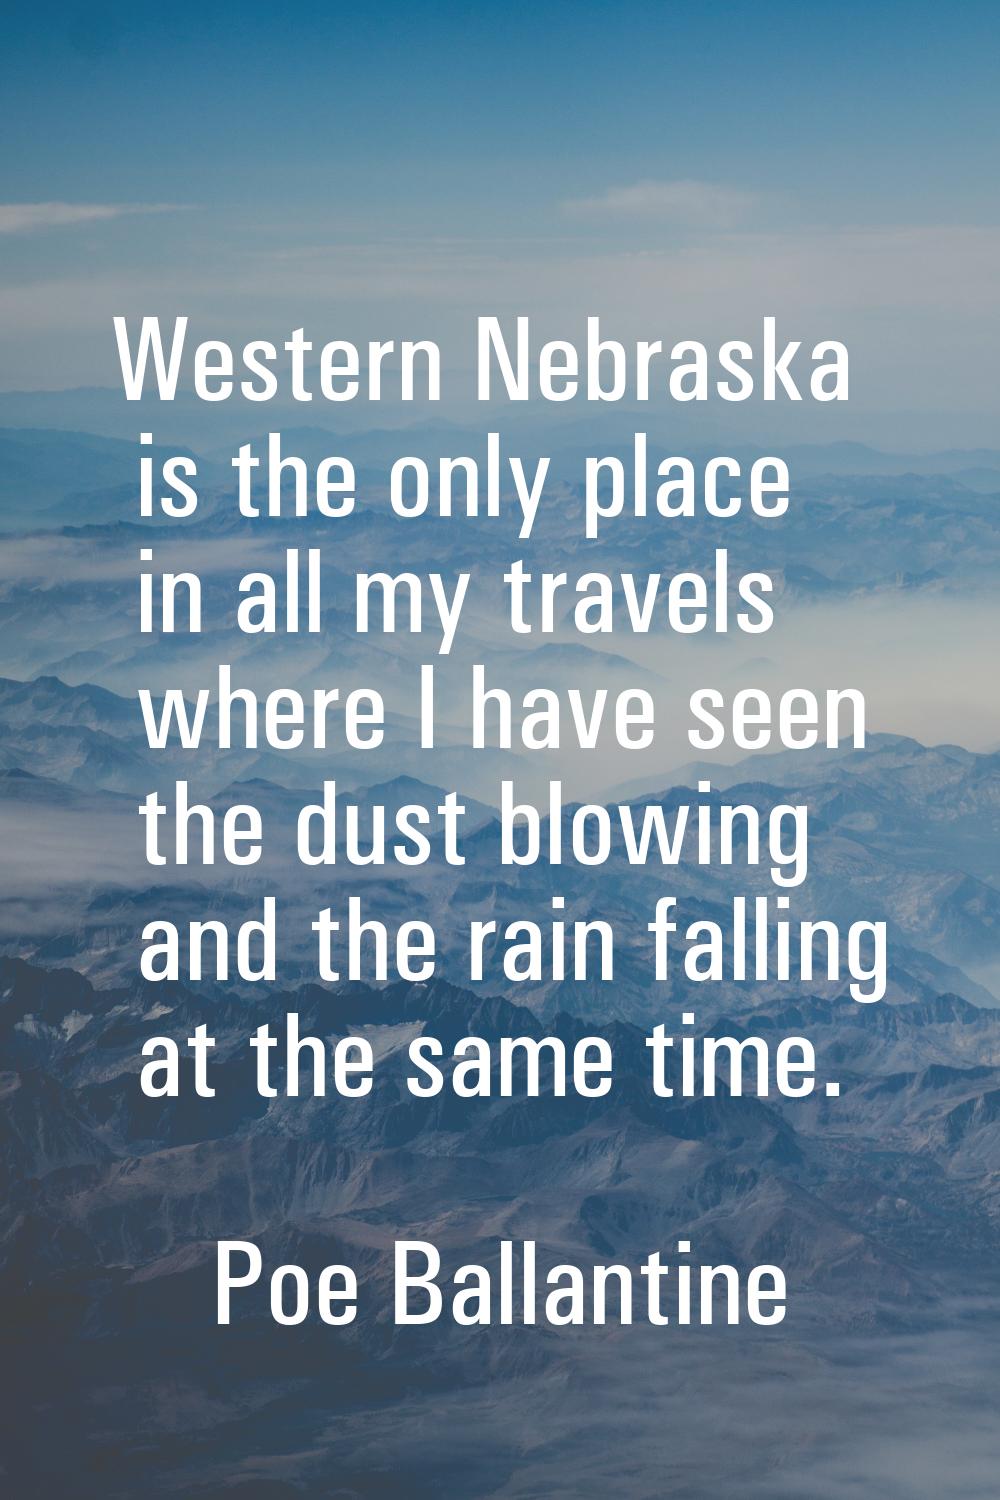 Western Nebraska is the only place in all my travels where I have seen the dust blowing and the rai